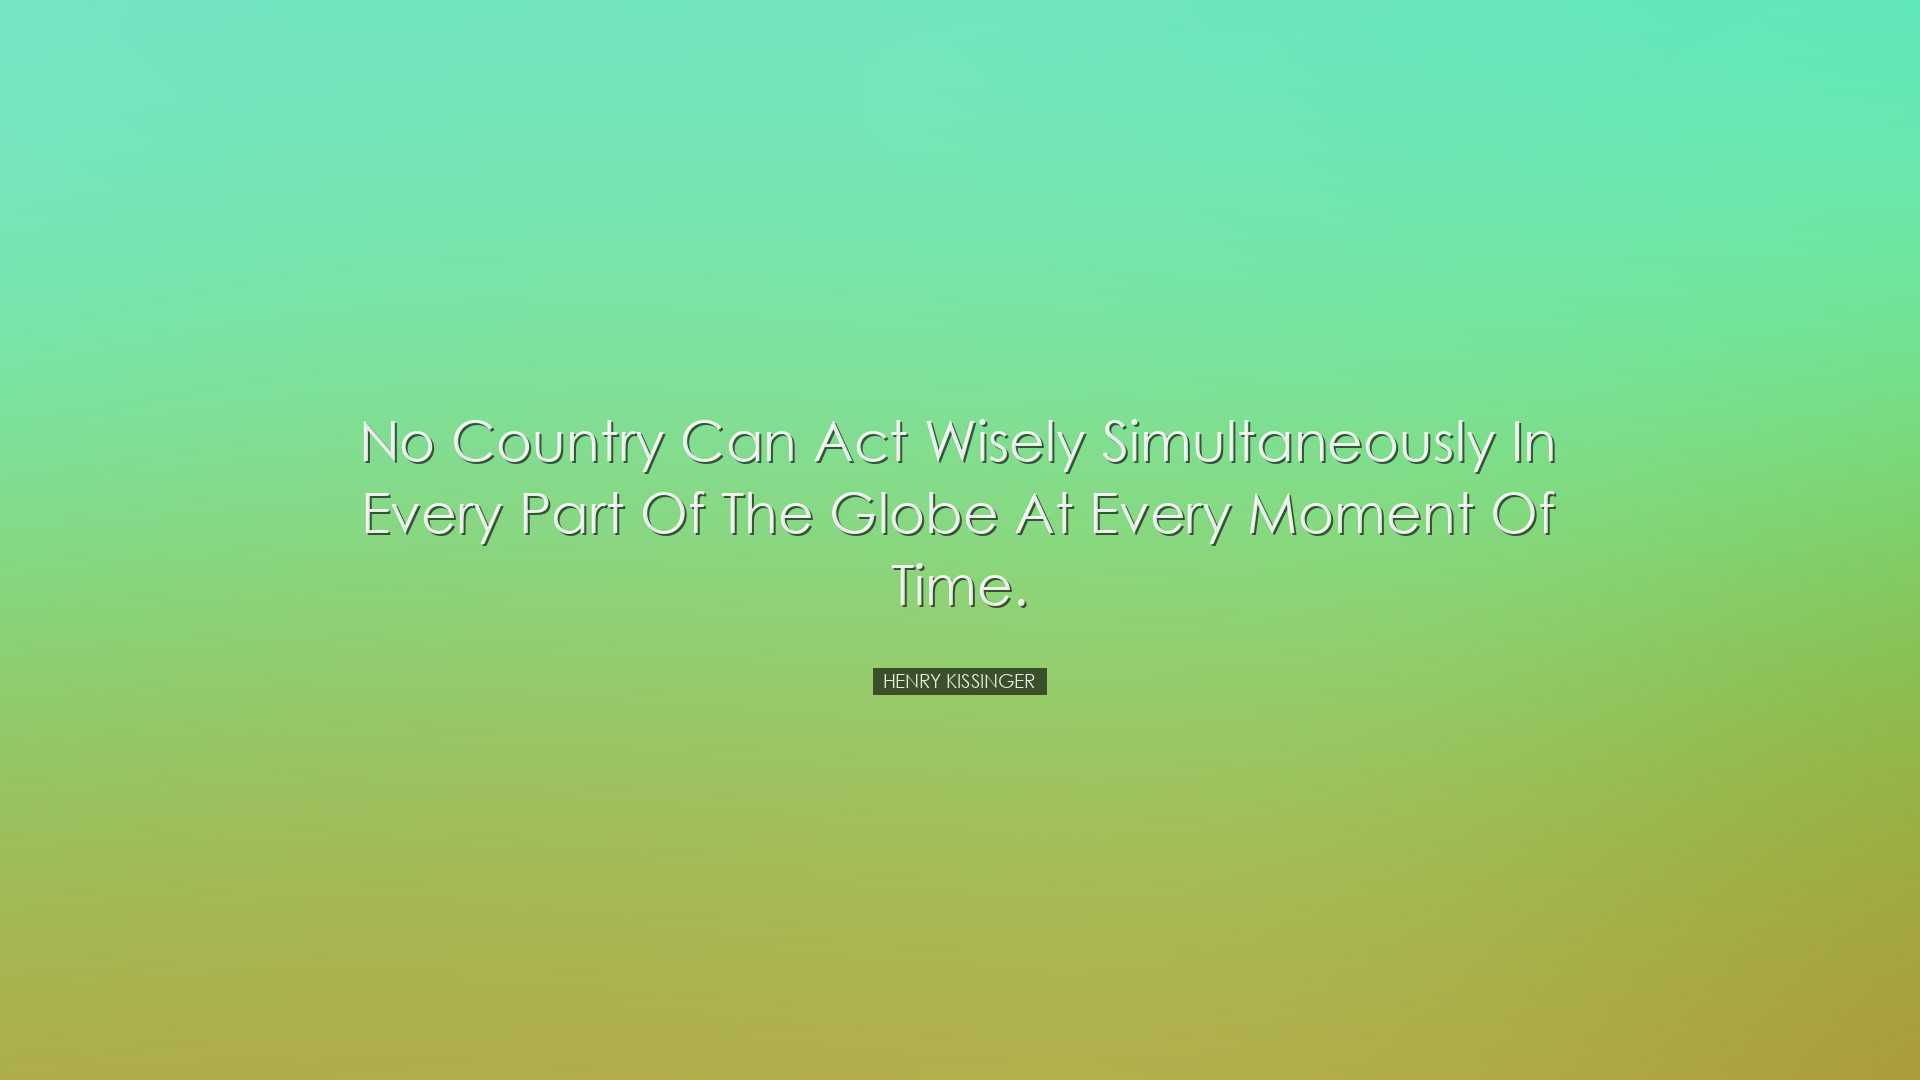 No country can act wisely simultaneously in every part of the glob